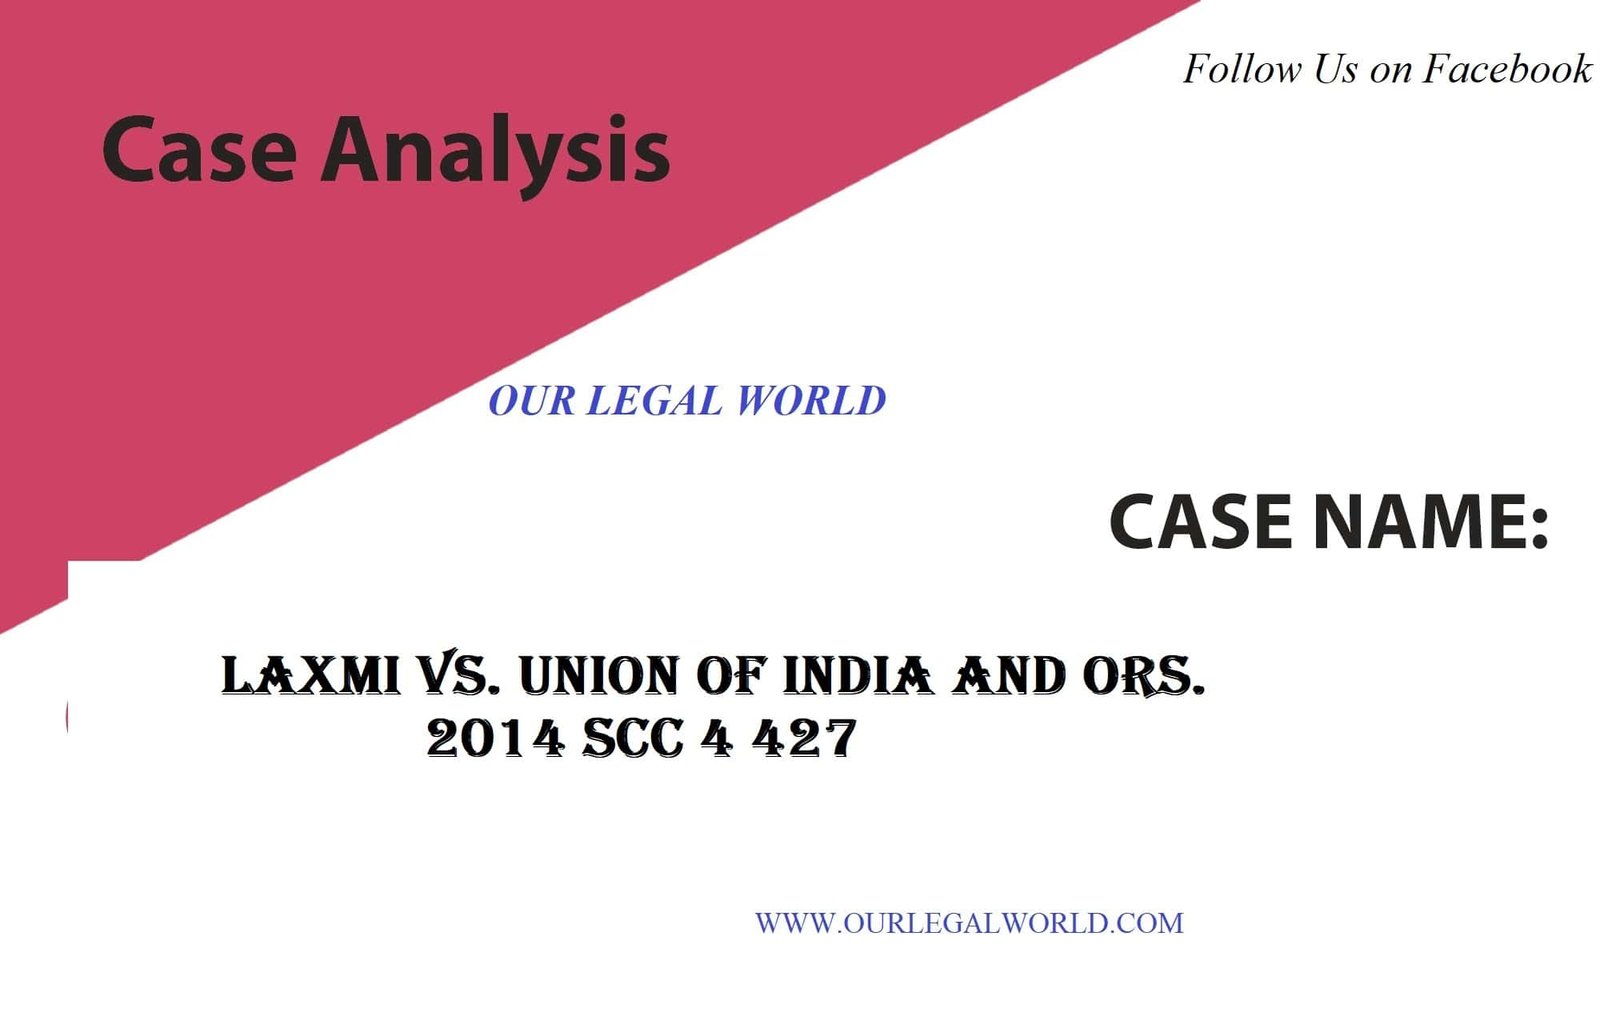 case study Laxmi vs. Union of India and Ors. ( Acid Attack)- Our Legal World